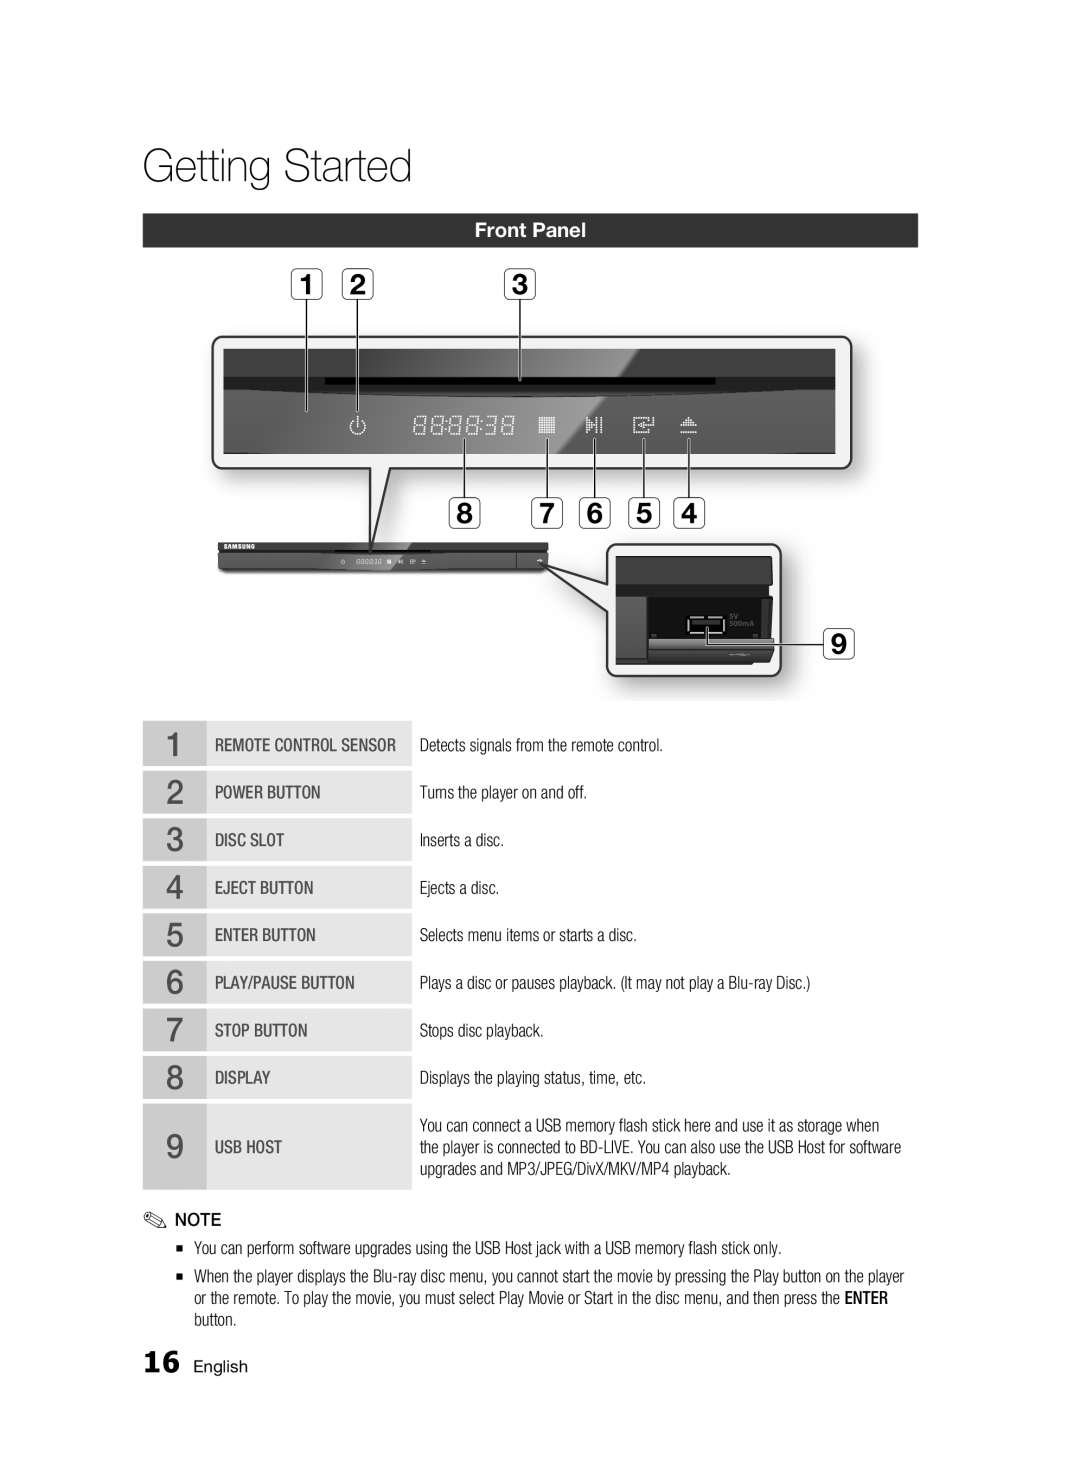 Samsung BD-D6500 user manual Front Panel, Getting Started, g f e d 